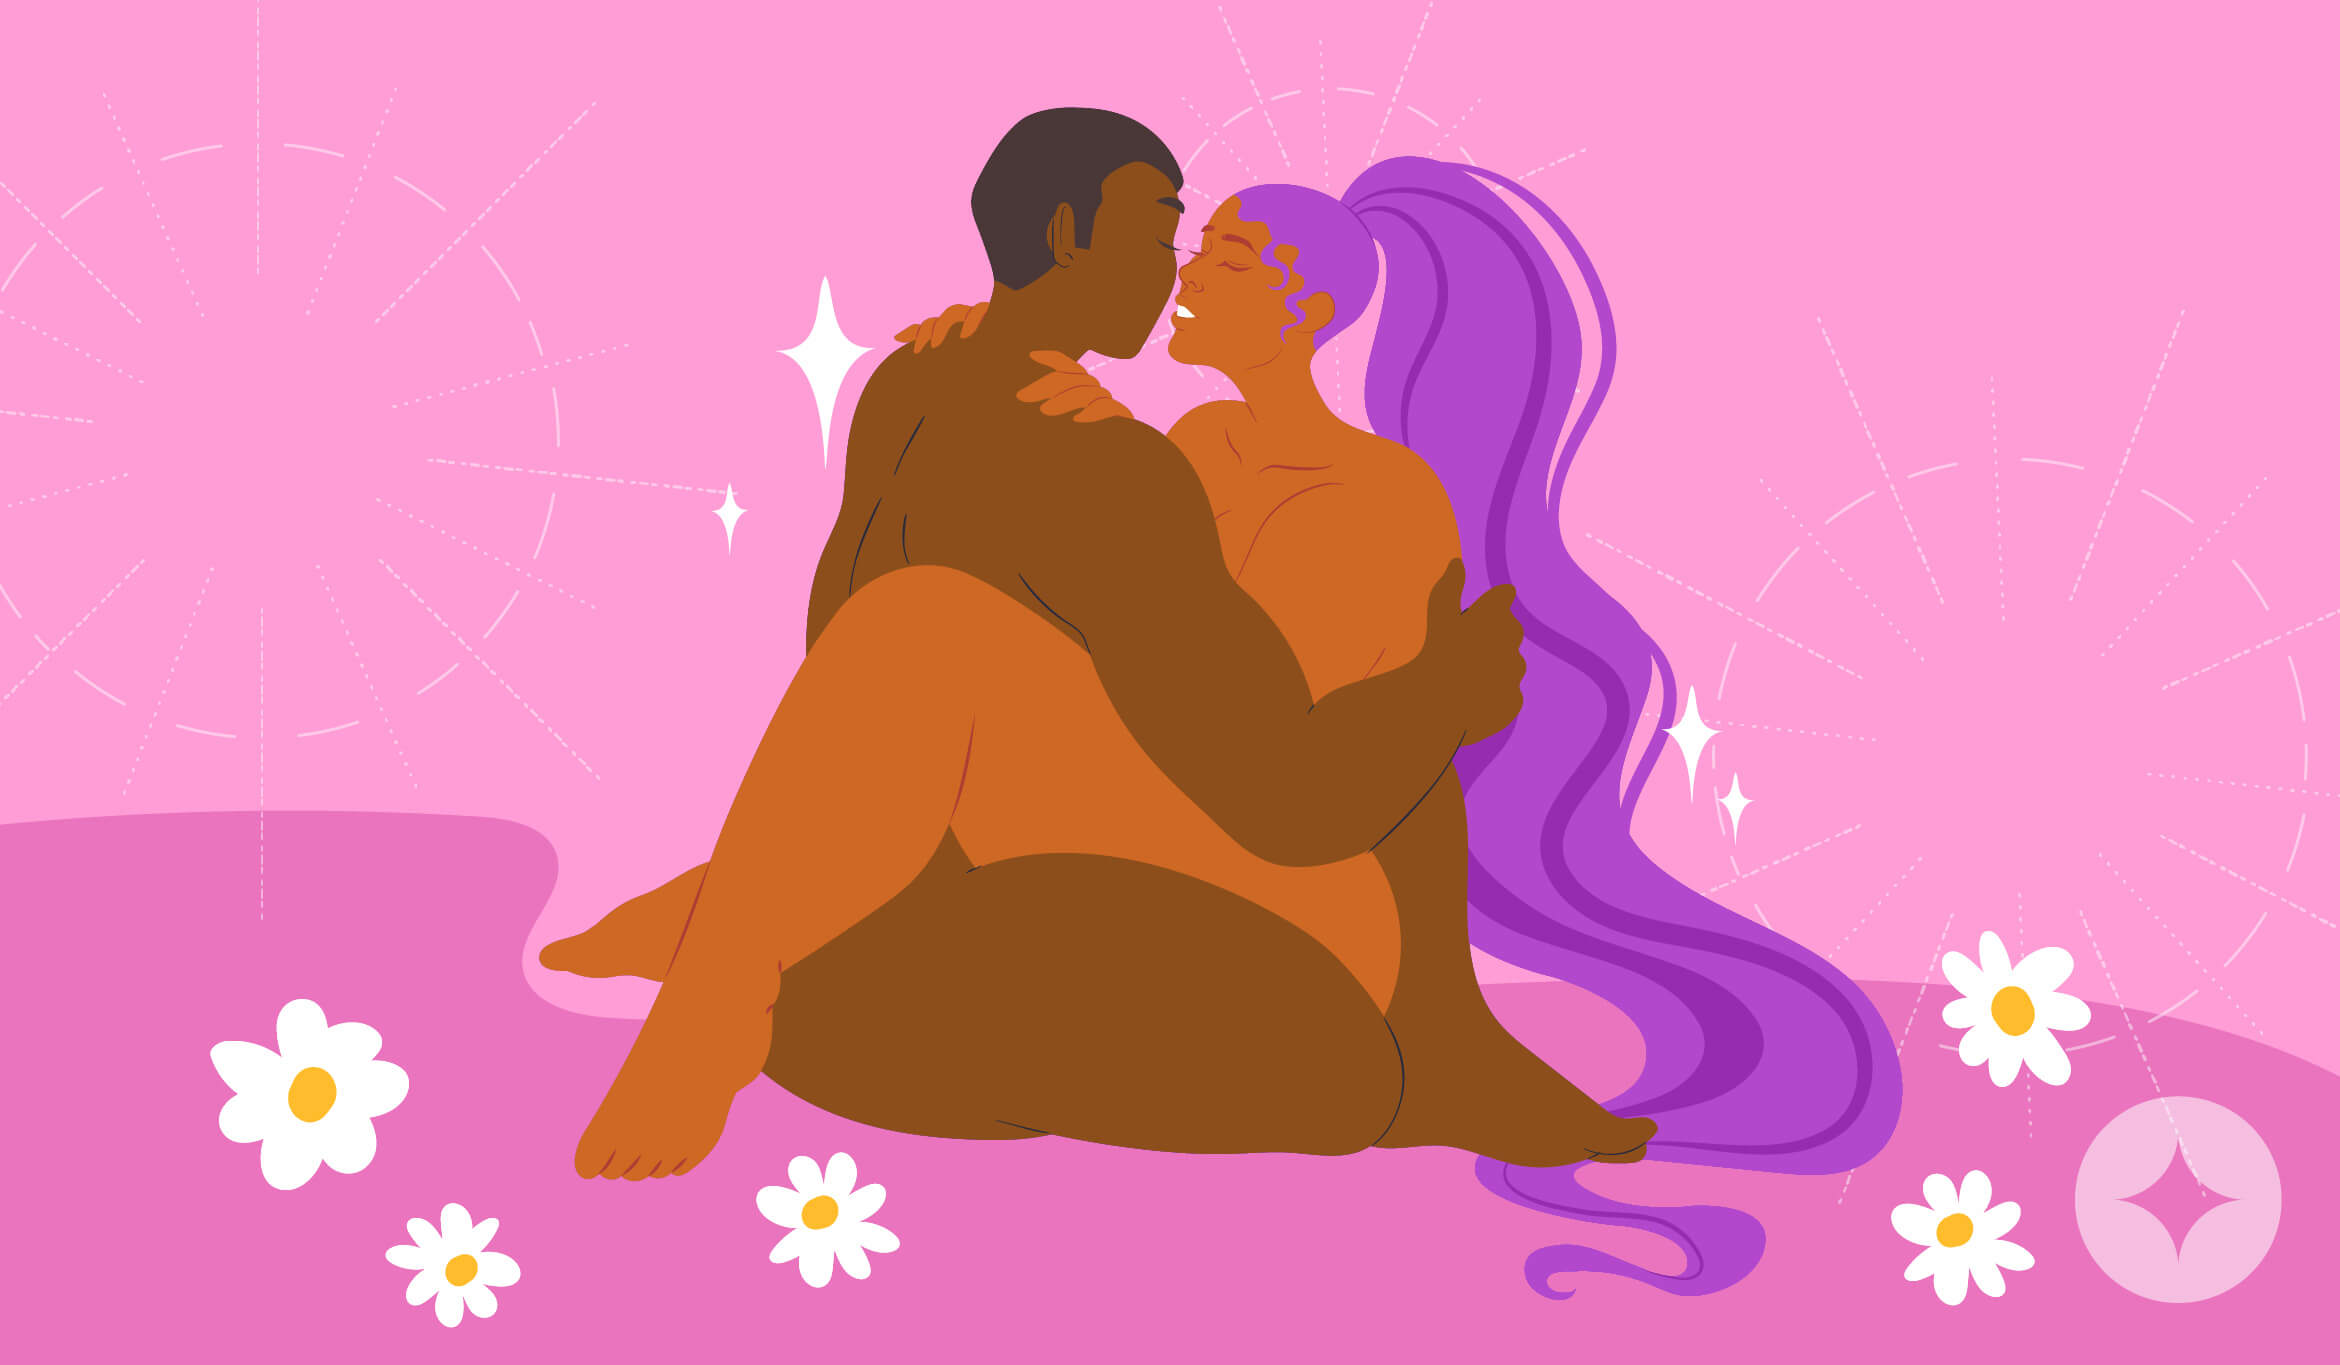 100 erotic positions to try with your partner